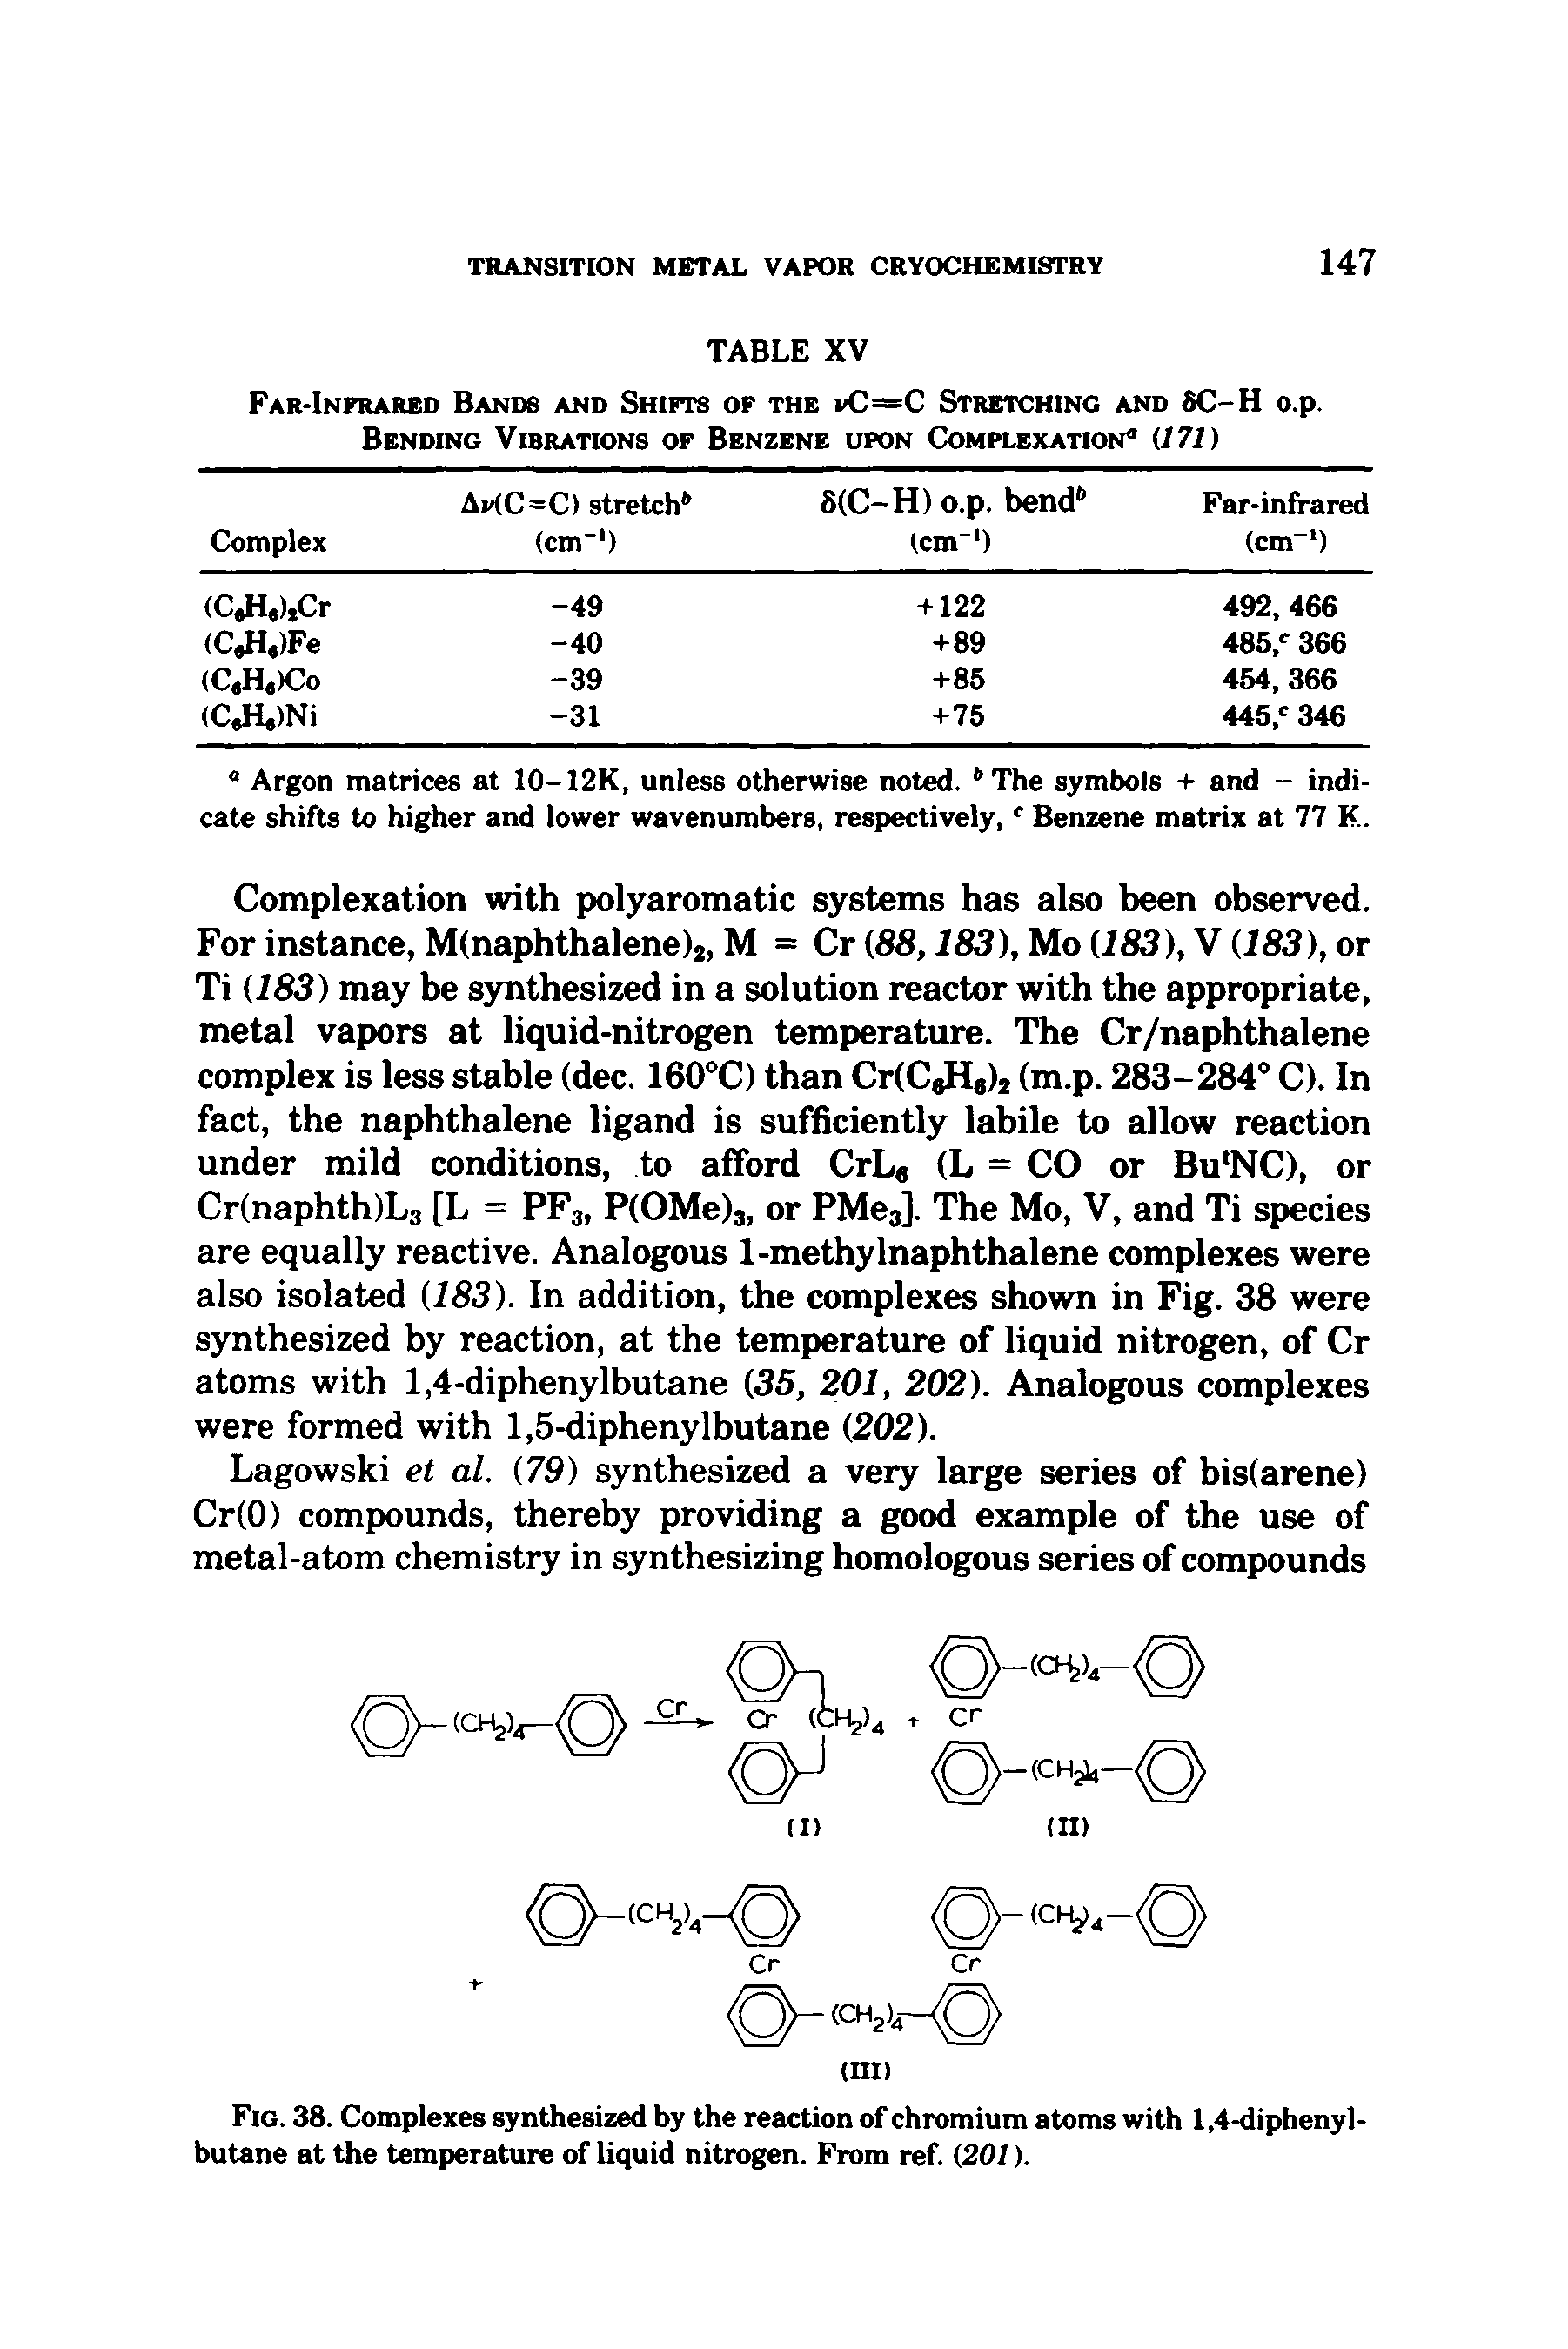 Fig. 38. Complexes synthesized by the reaction of chromium atoms with 1,4-diphenylbutane at the temperature of liquid nitrogen. From ref. (201).